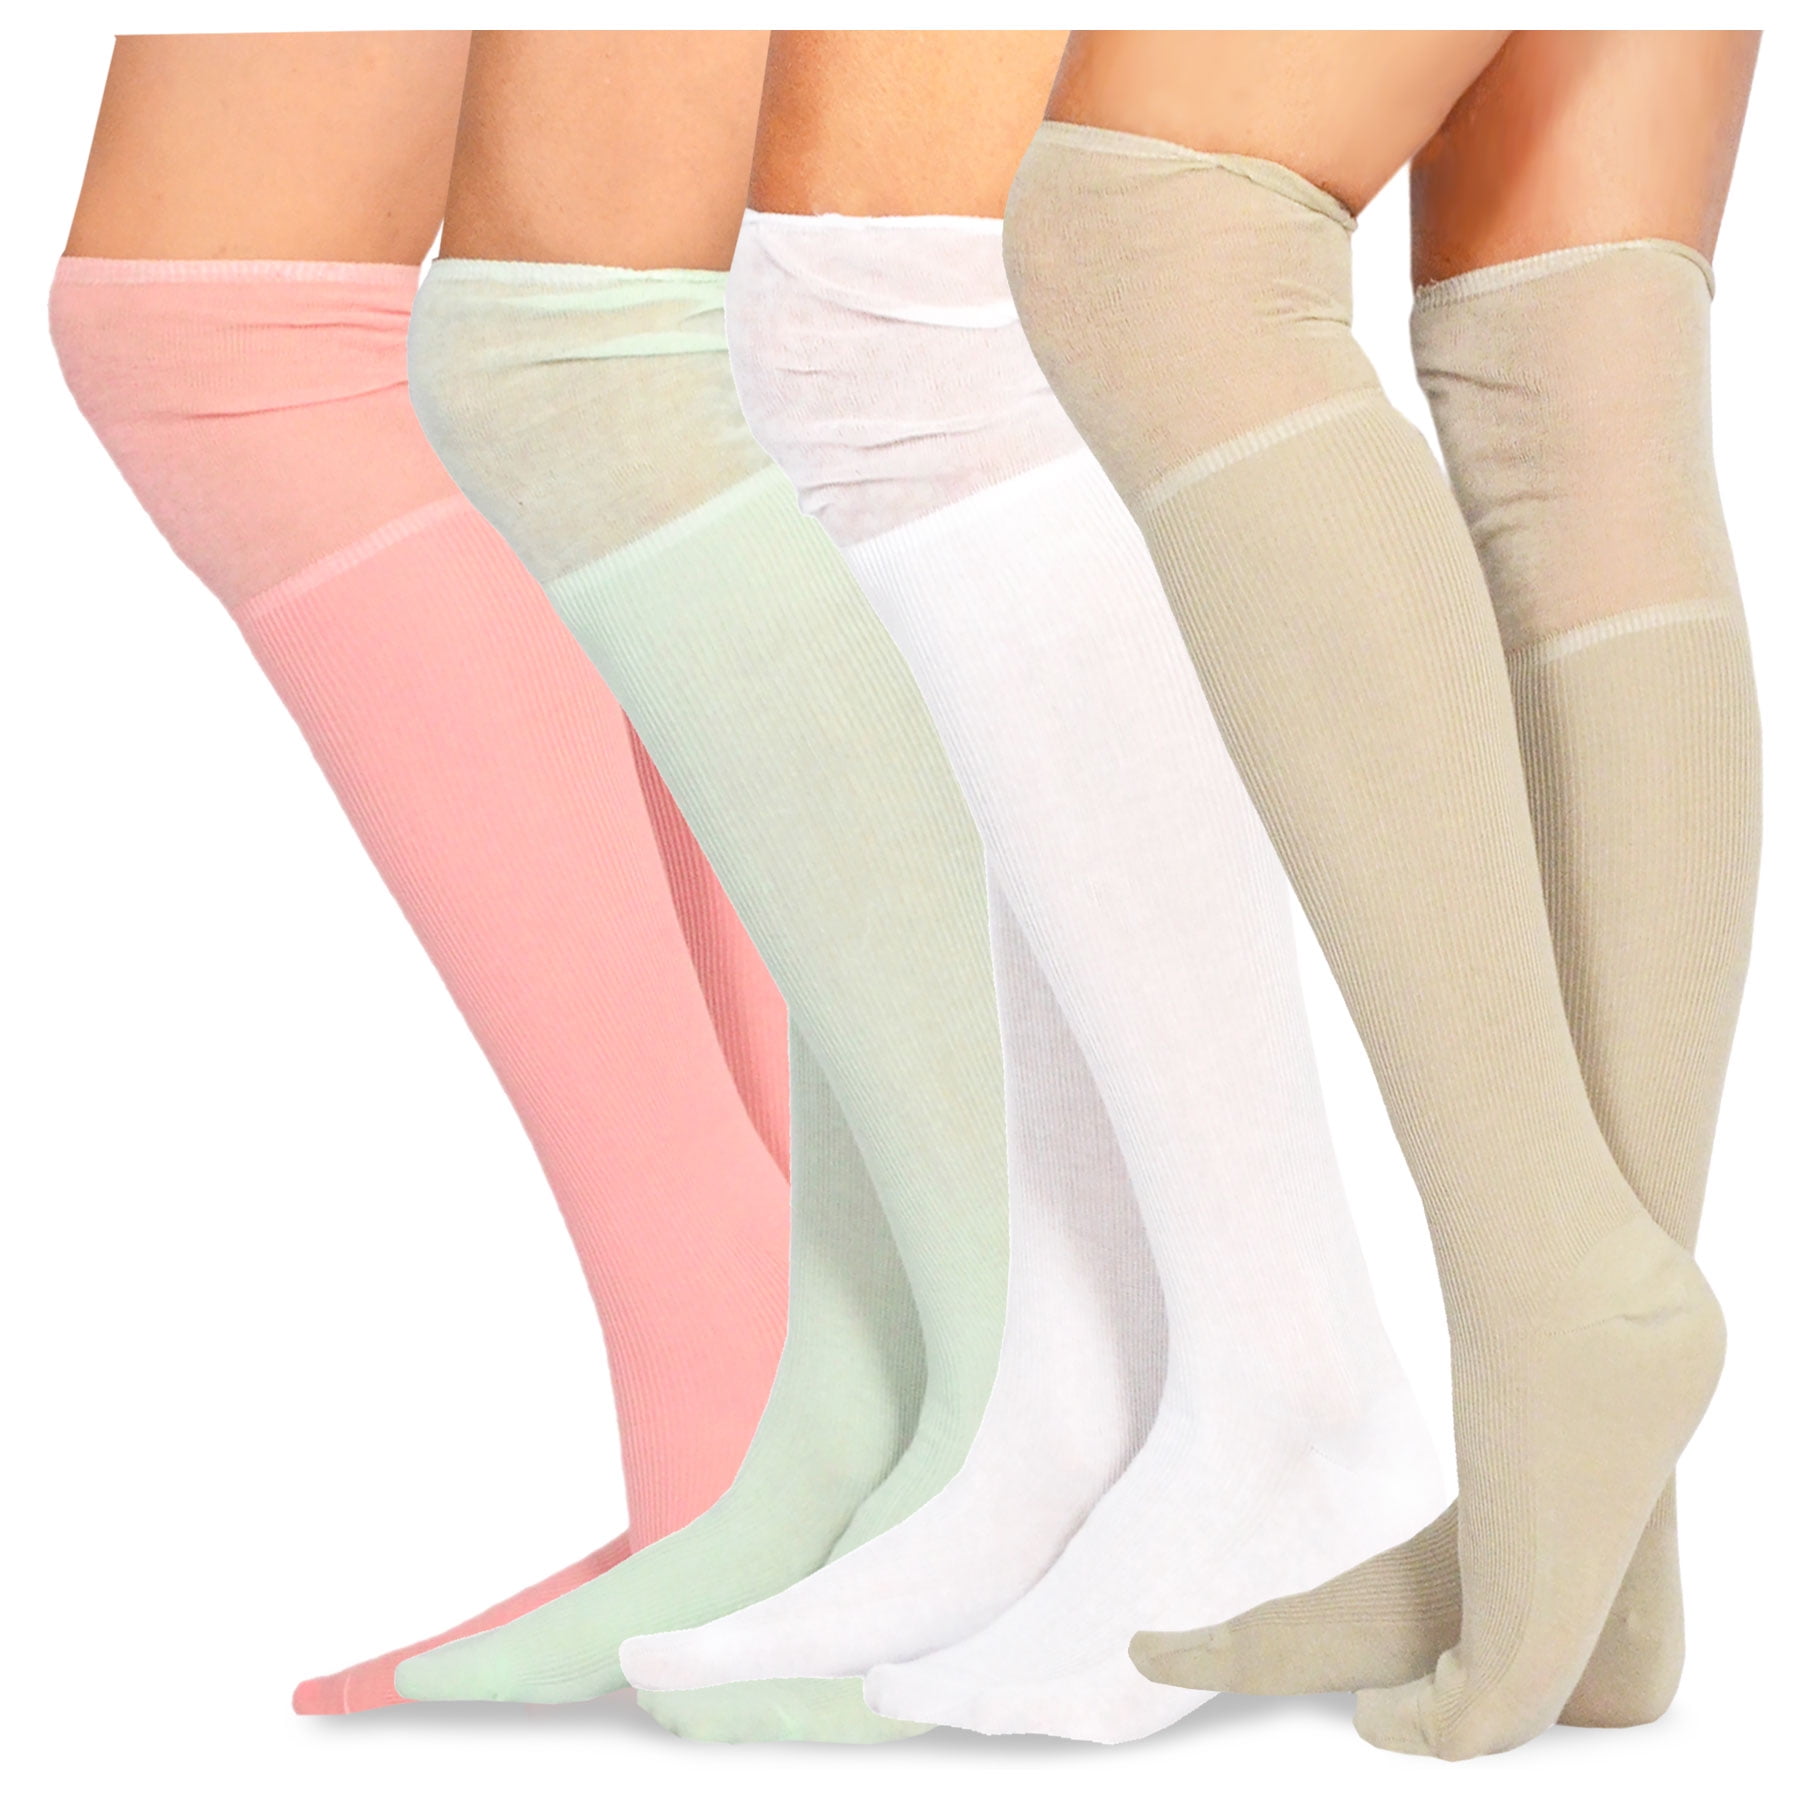 Teehee Women's Fashion Cotton Over The Knee Socks - 4 Pairs Pack ...